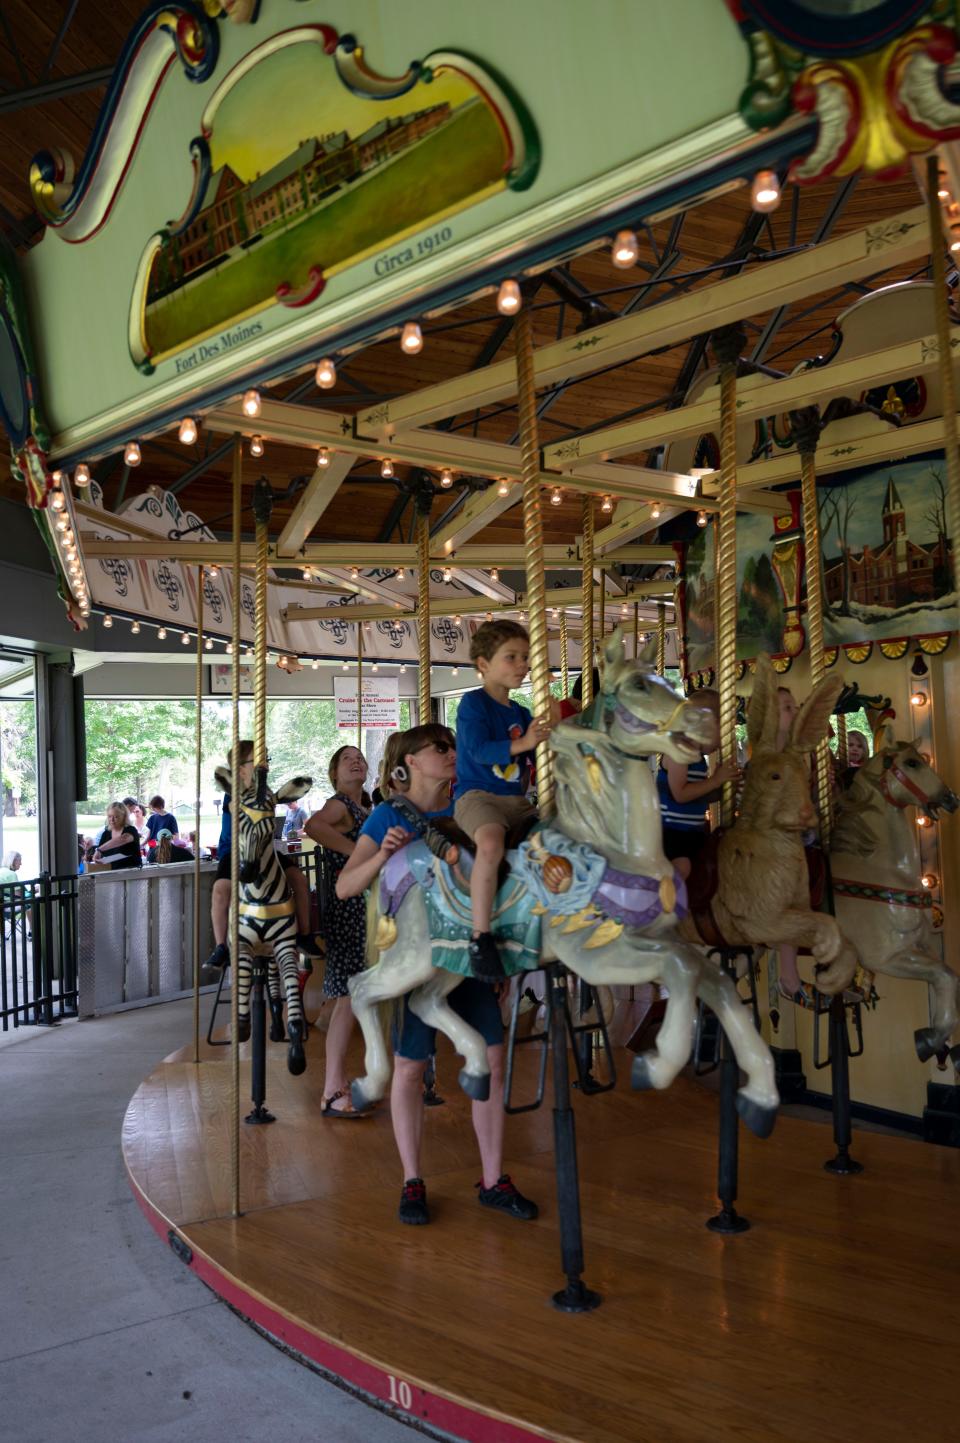 This year the Heritage Carousel of Des Moines will be celebrating its 25th anniversary of Union Park carousel installation.